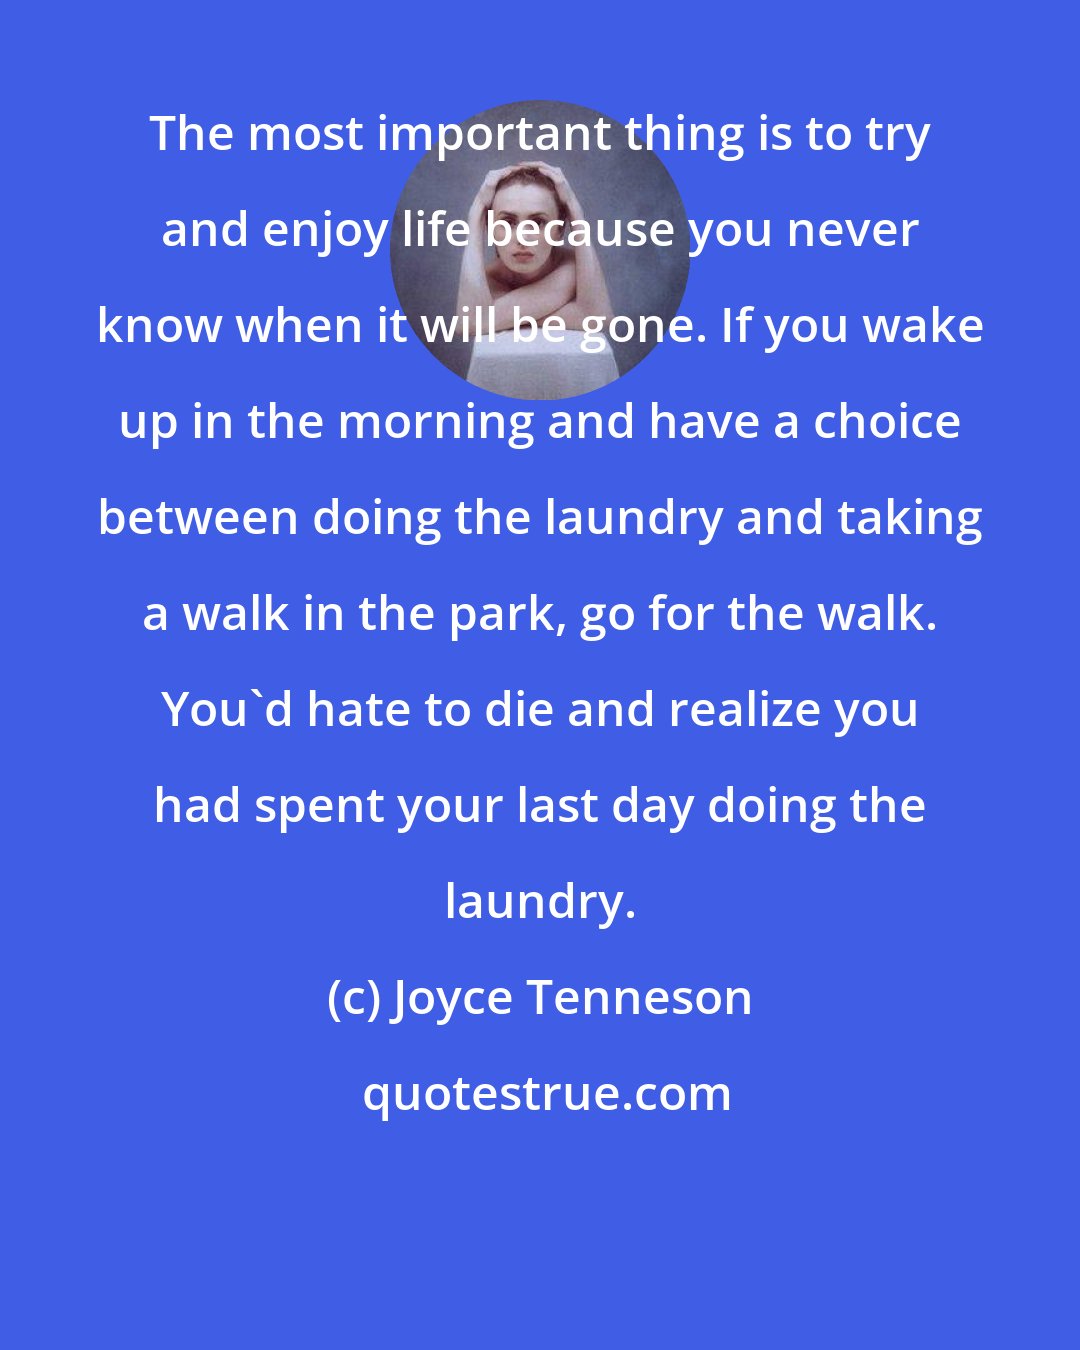 Joyce Tenneson: The most important thing is to try and enjoy life because you never know when it will be gone. If you wake up in the morning and have a choice between doing the laundry and taking a walk in the park, go for the walk. You'd hate to die and realize you had spent your last day doing the laundry.